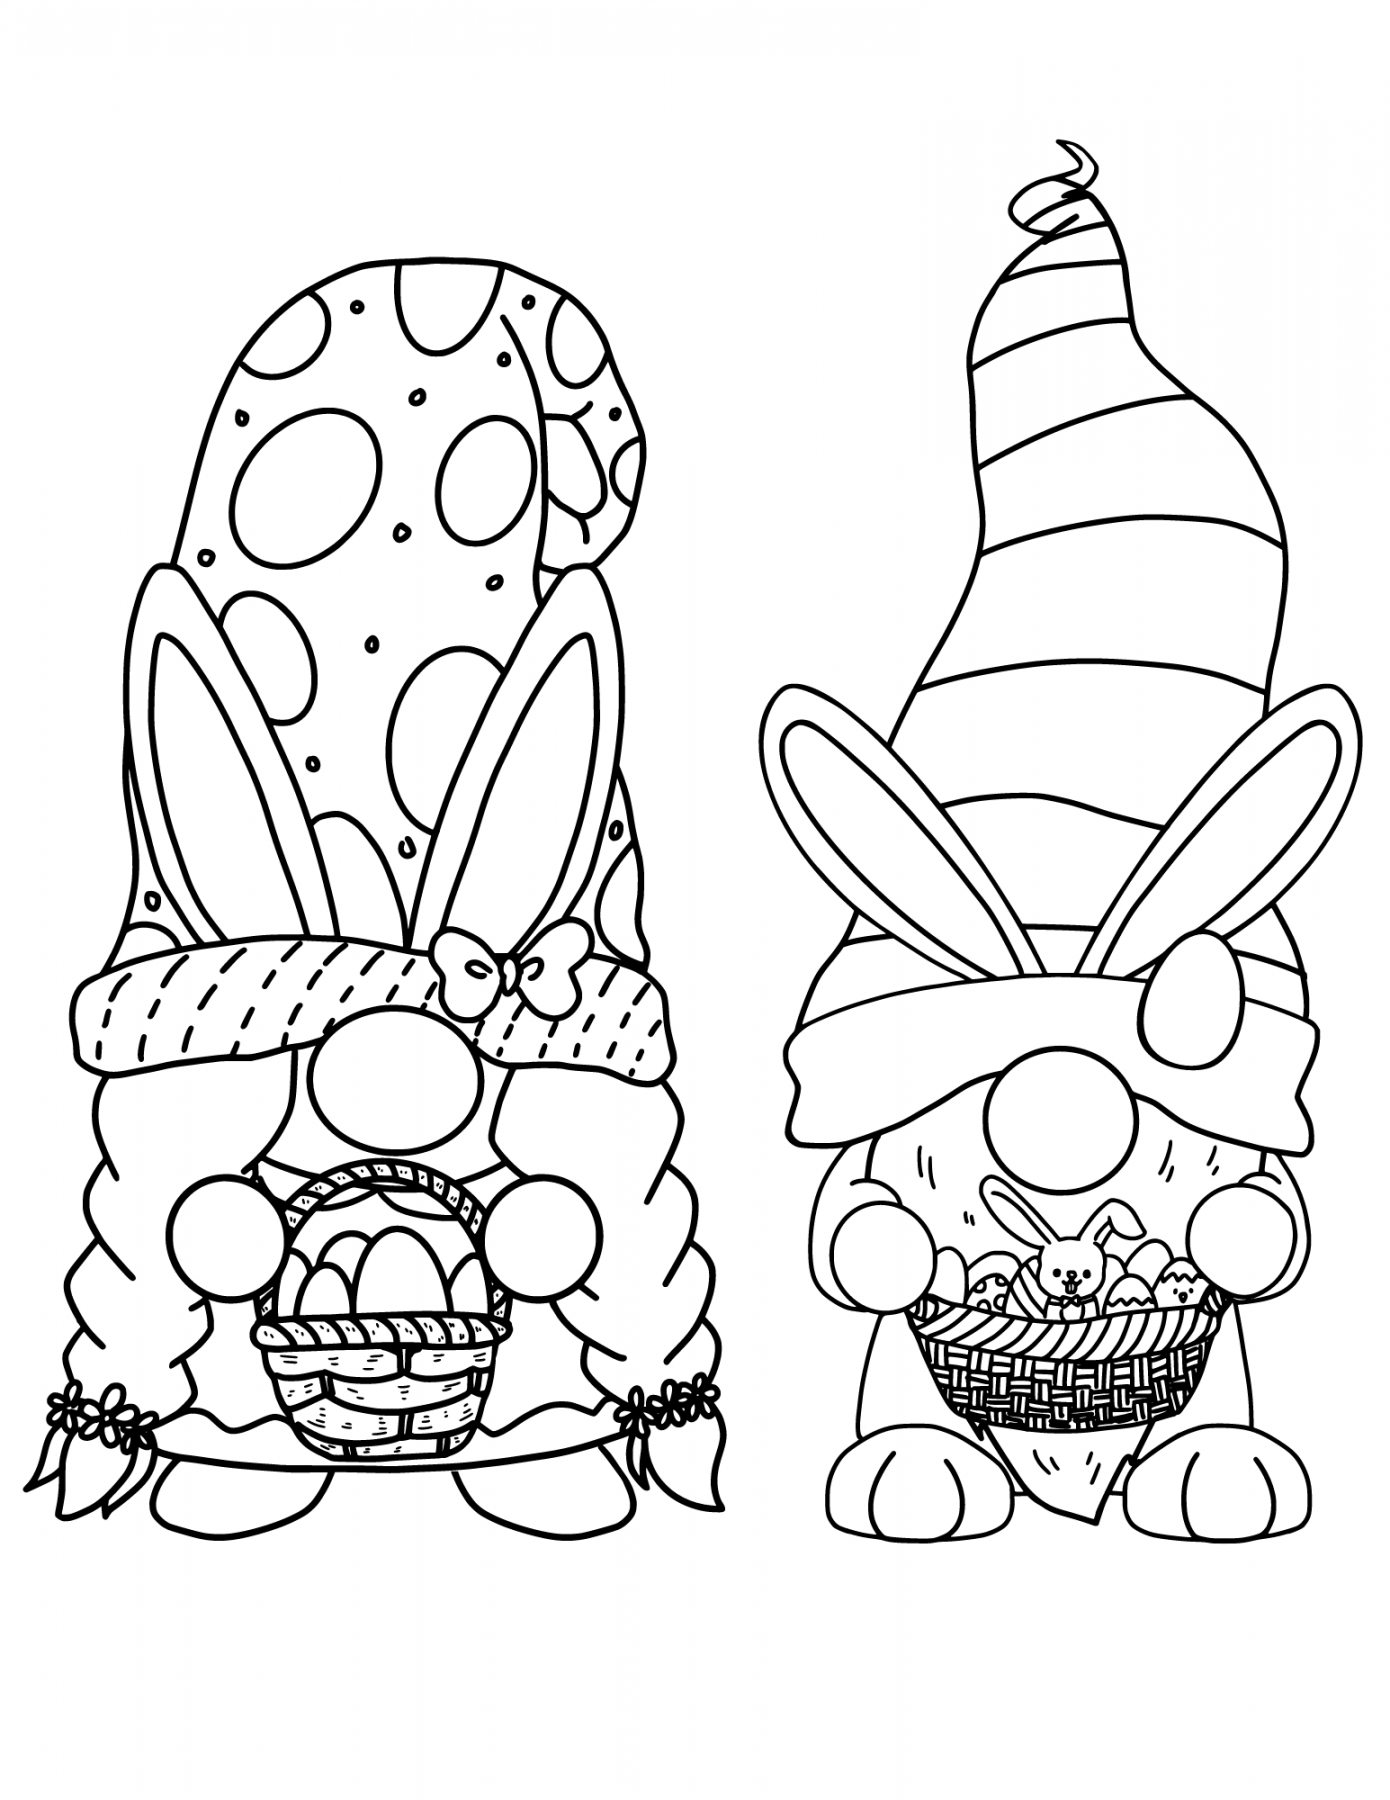 Free Printable Gnome Coloring Pages - Printable - Free Printable Easter Gnomes Coloring Pages for Kids and Adults